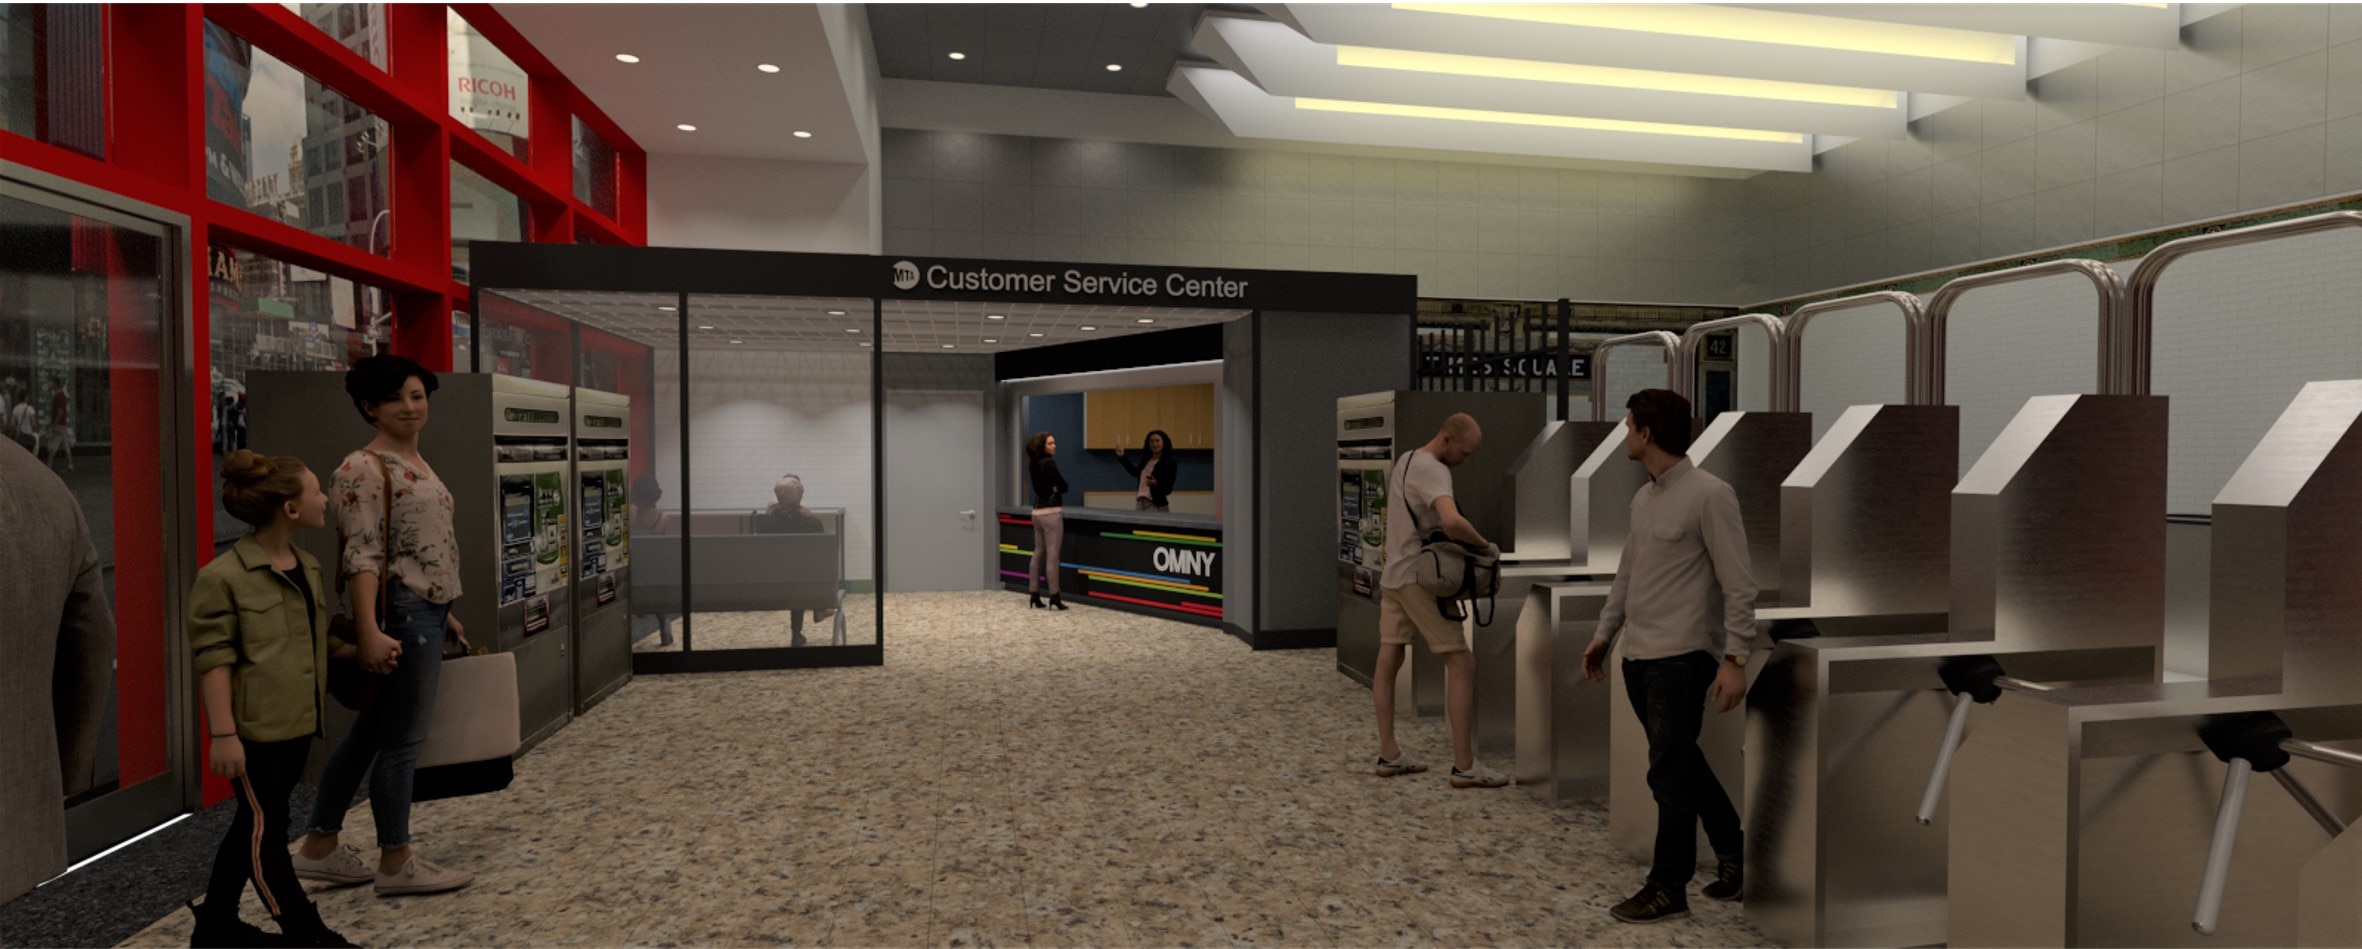 The Metropolitan Transportation Authority (MTA) and Transport Workers Union (TWU) Local 100 today announced the next phase of enhanced customer service through the opening of comprehensive Customer Service Centers in the subway system. 